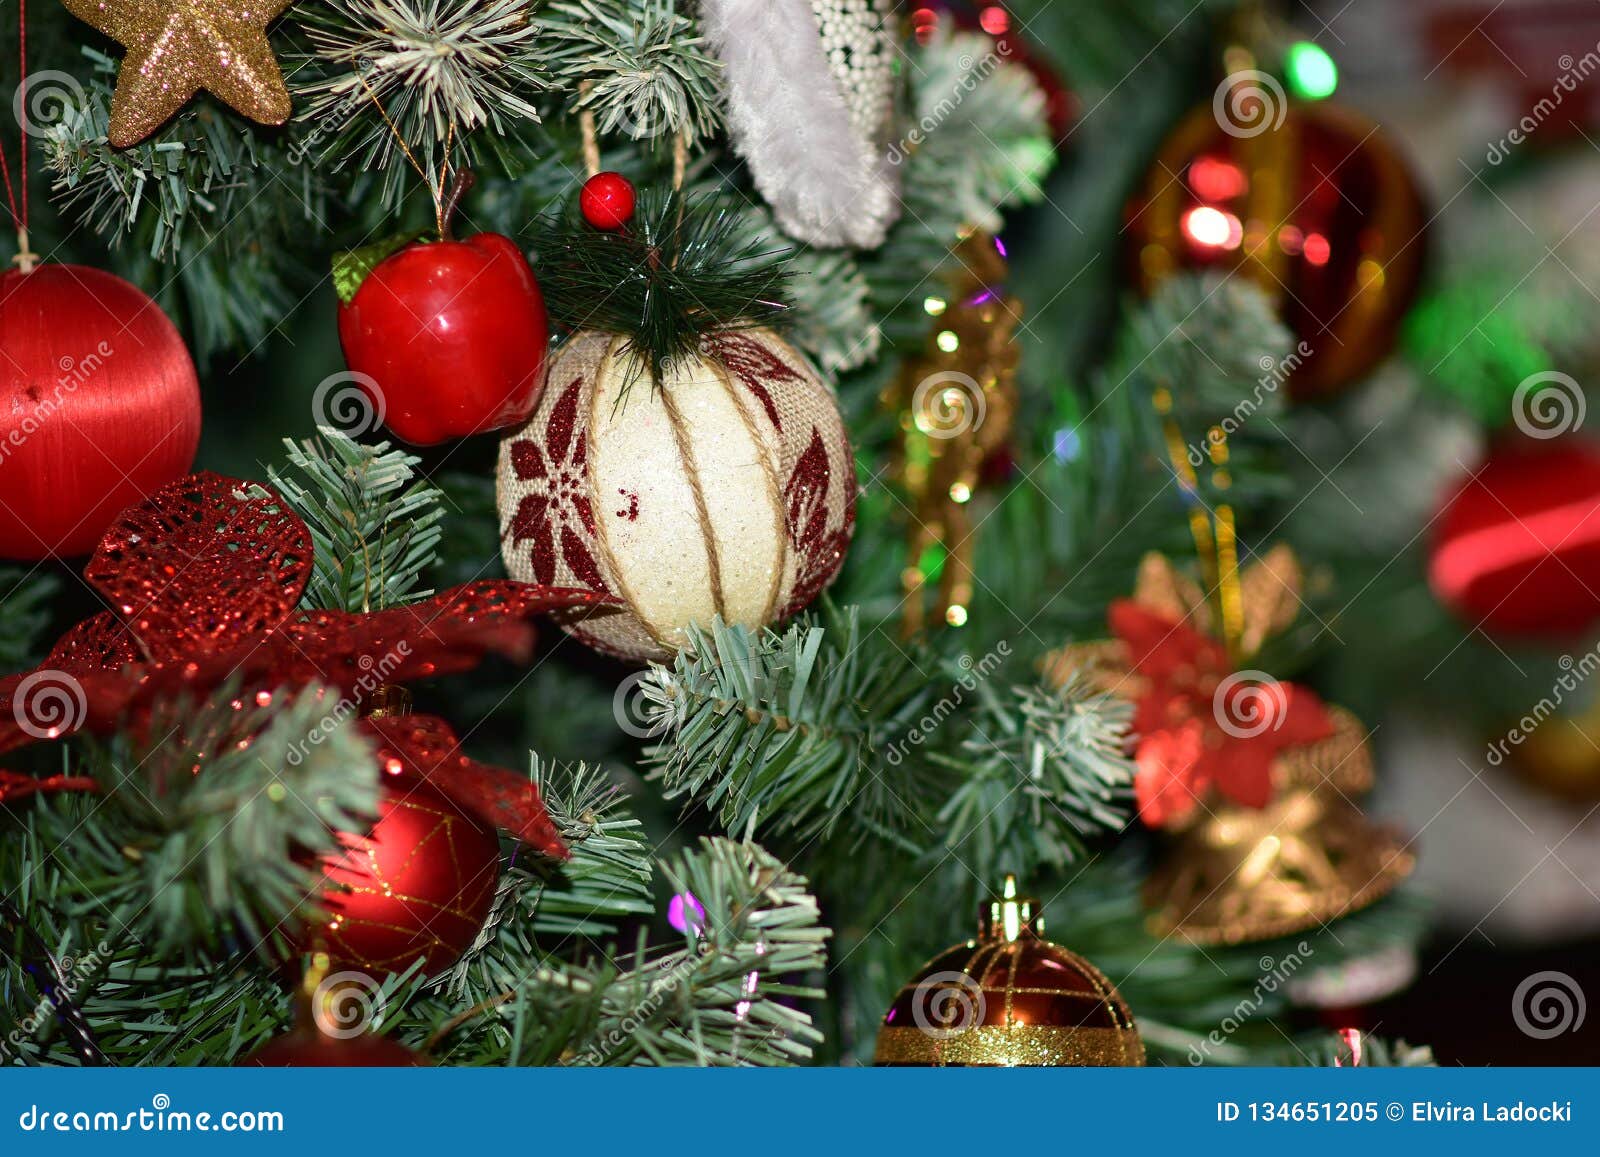 Colorful Glowing Christmas Decorations on Tree Stock Image - Image of ...